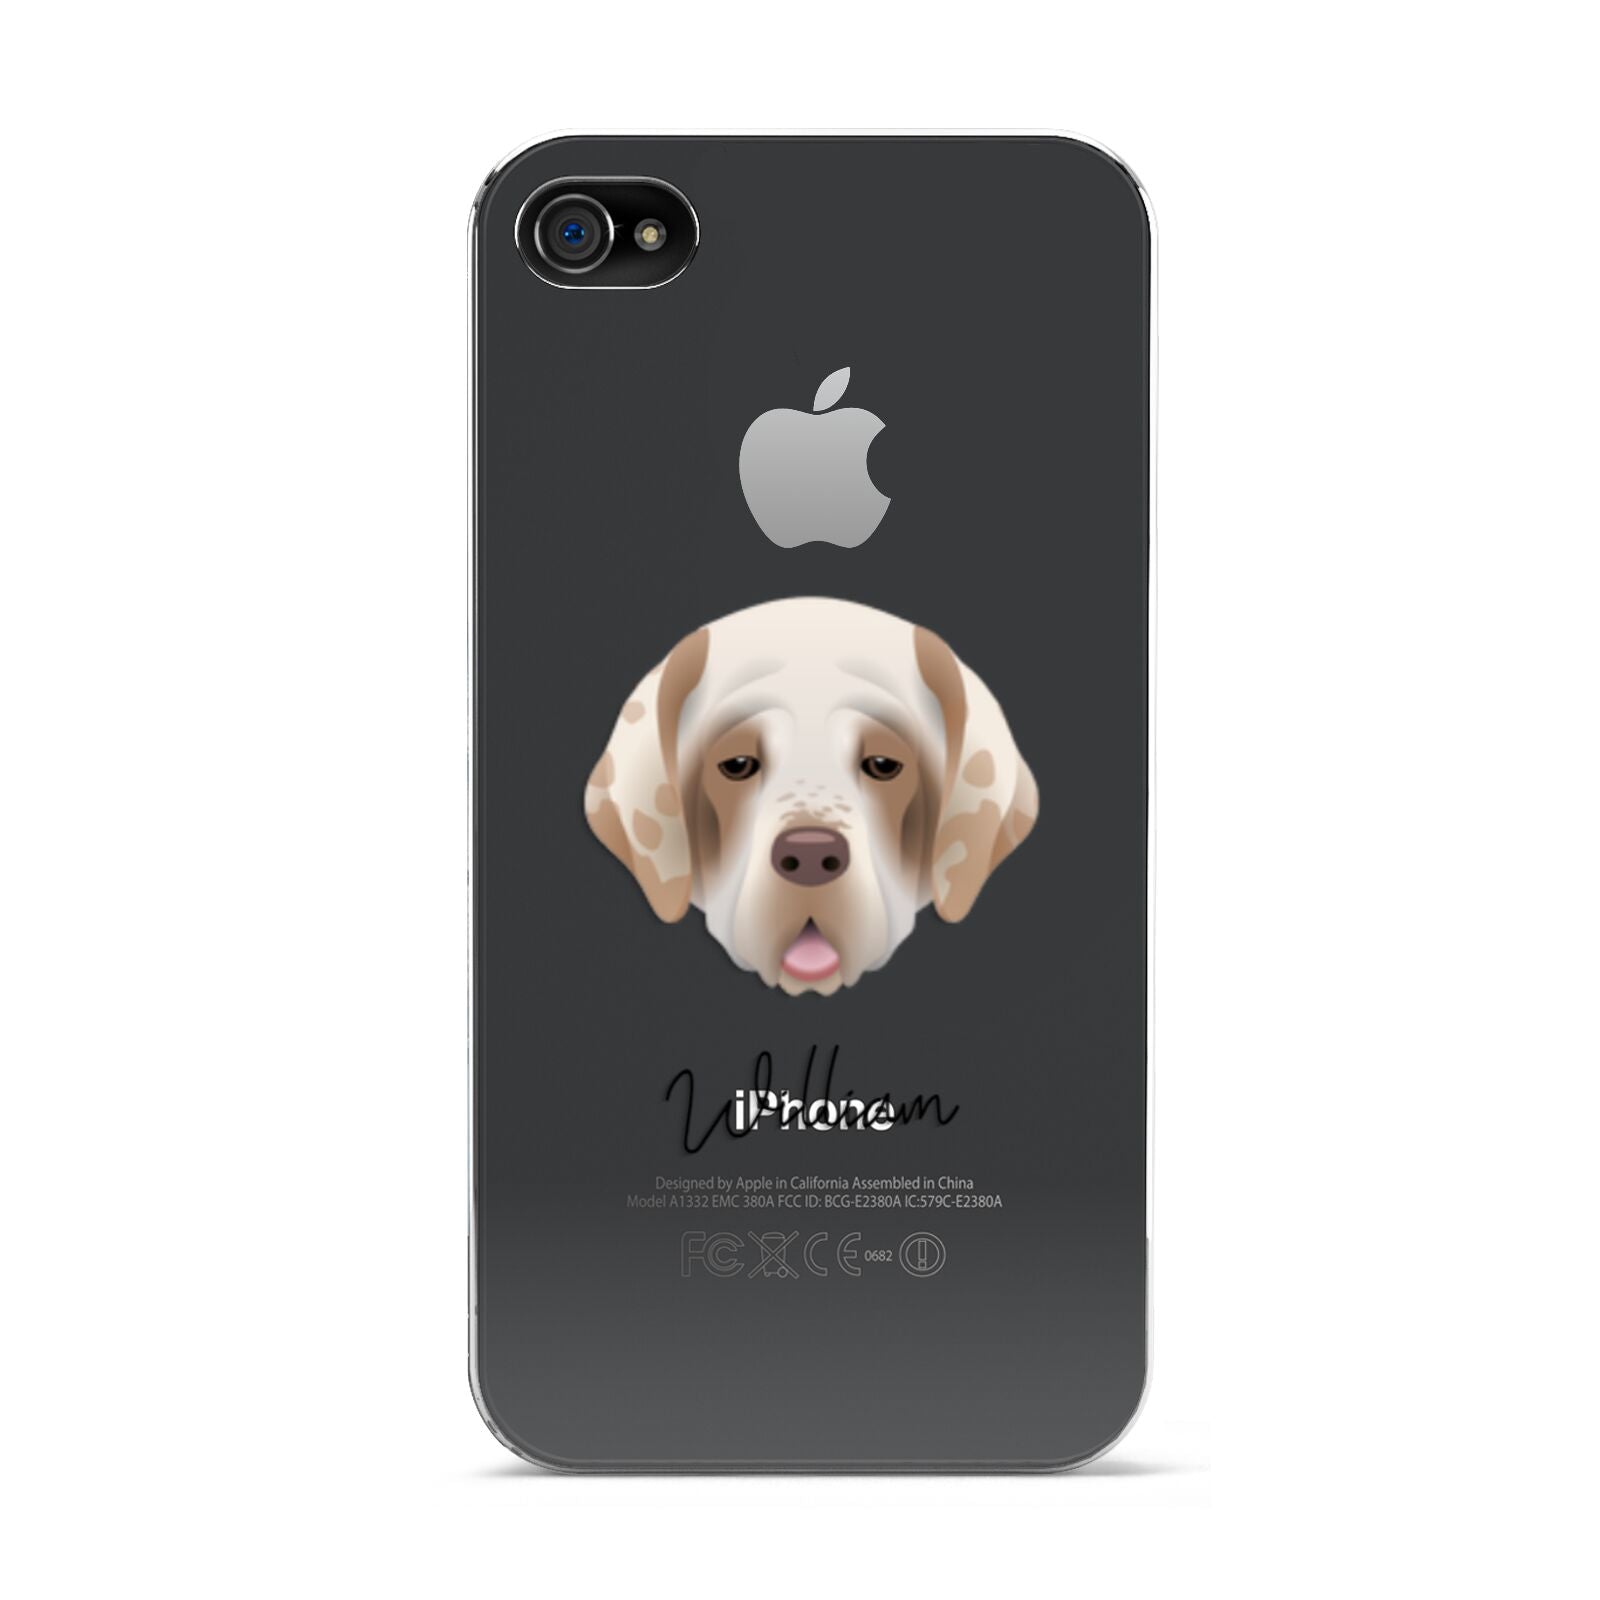 Cirneco Dell Etna Personalised Apple iPhone 4s Case